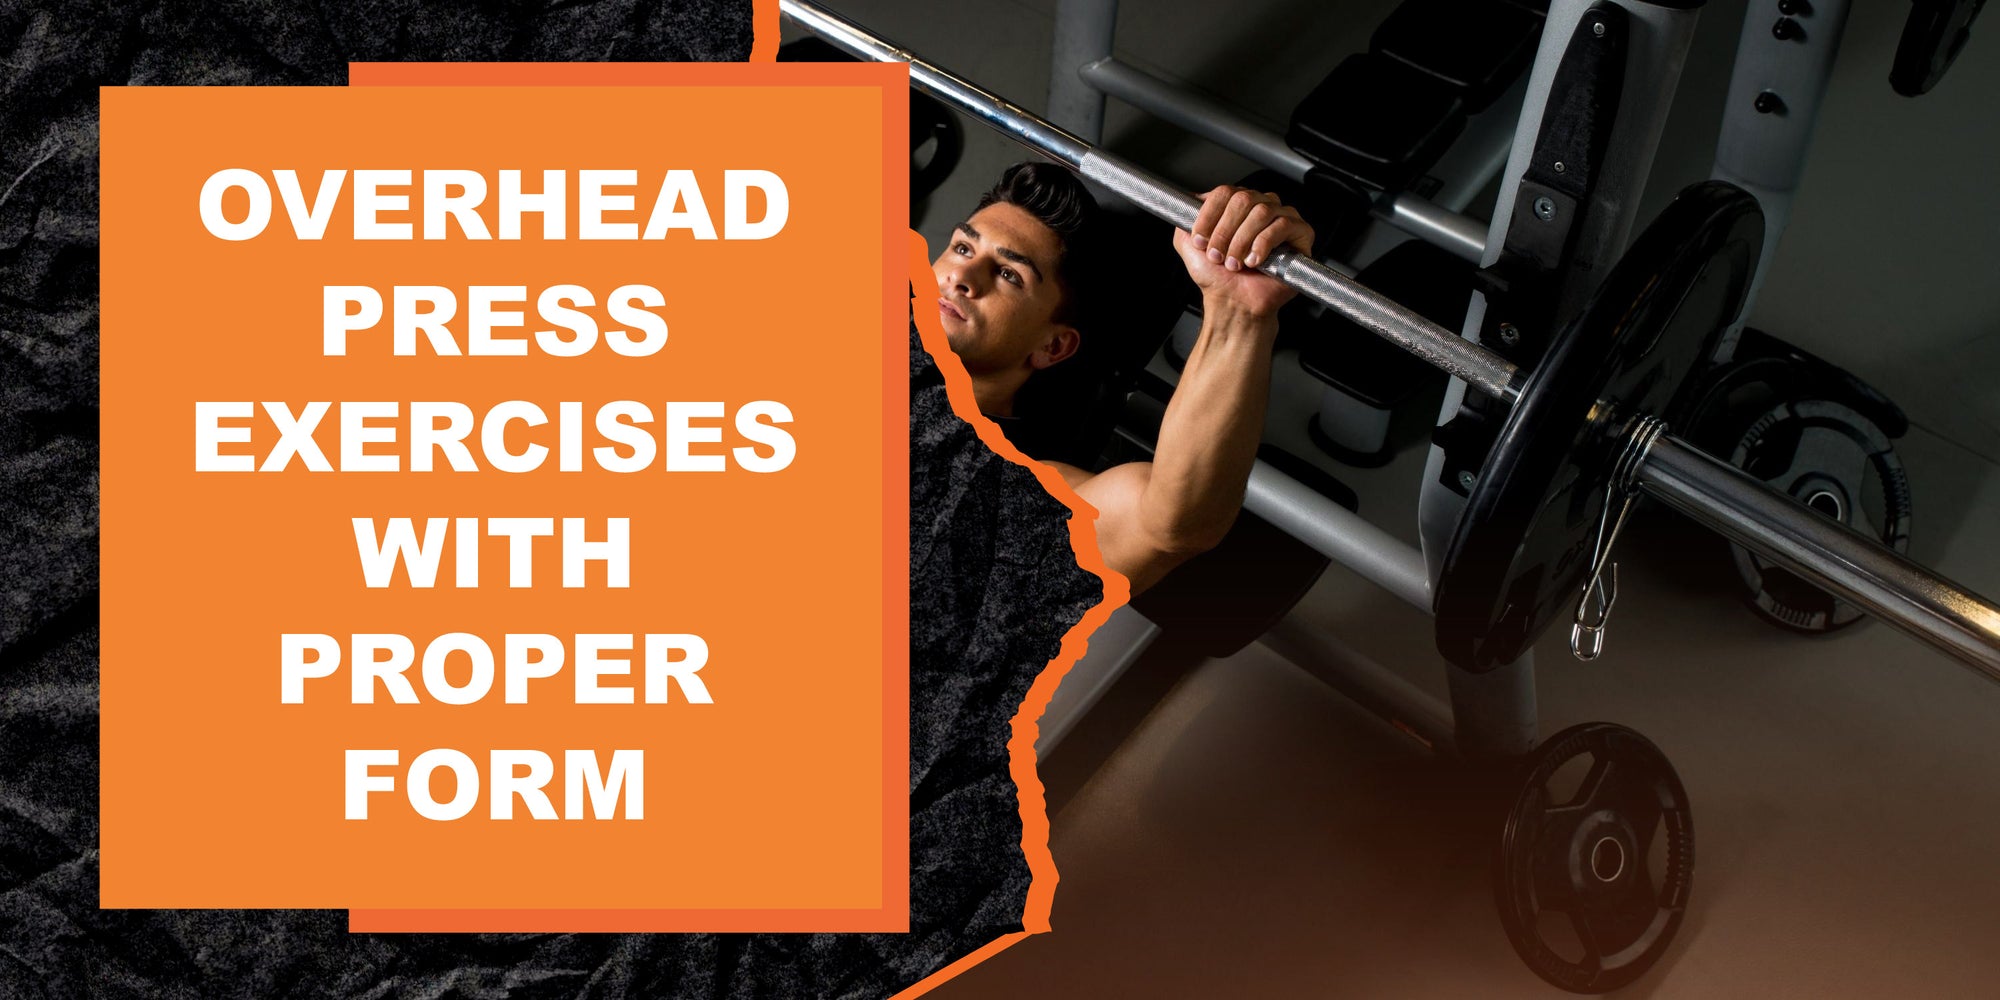 How to Perform Overhead Press Exercises with Proper Form